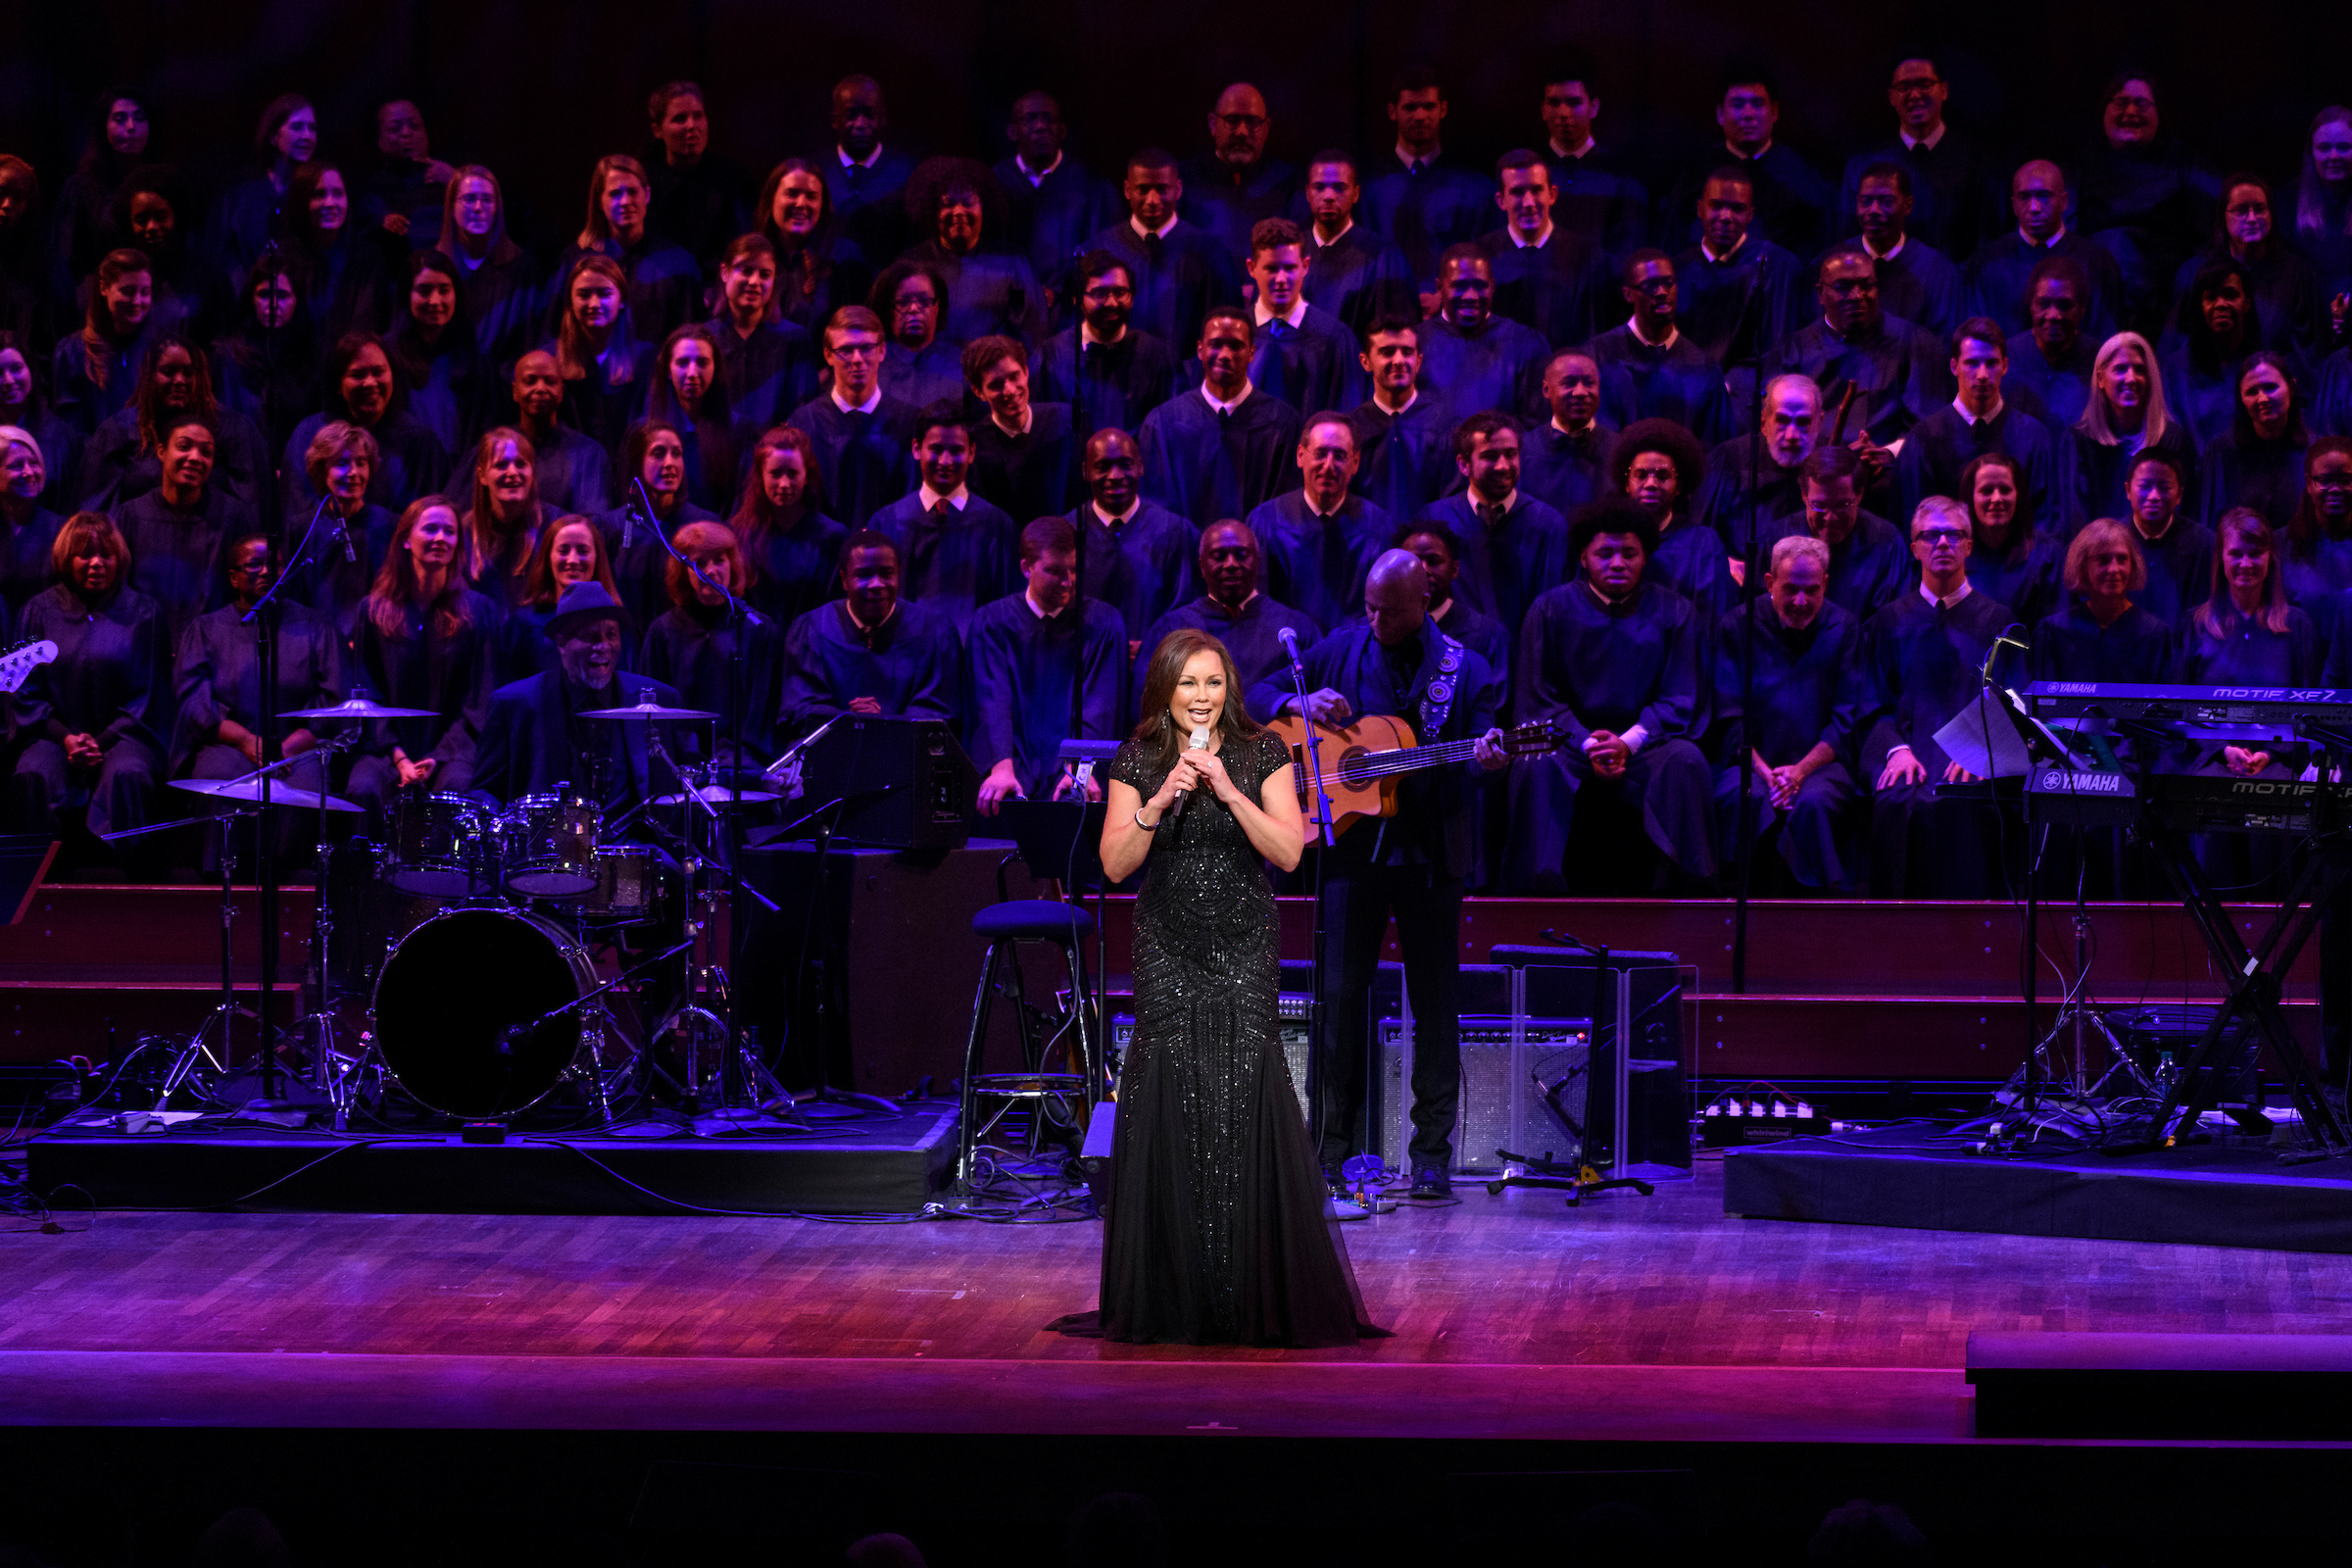 Vanessa Williams wears a long black gown and sings in front of a choir